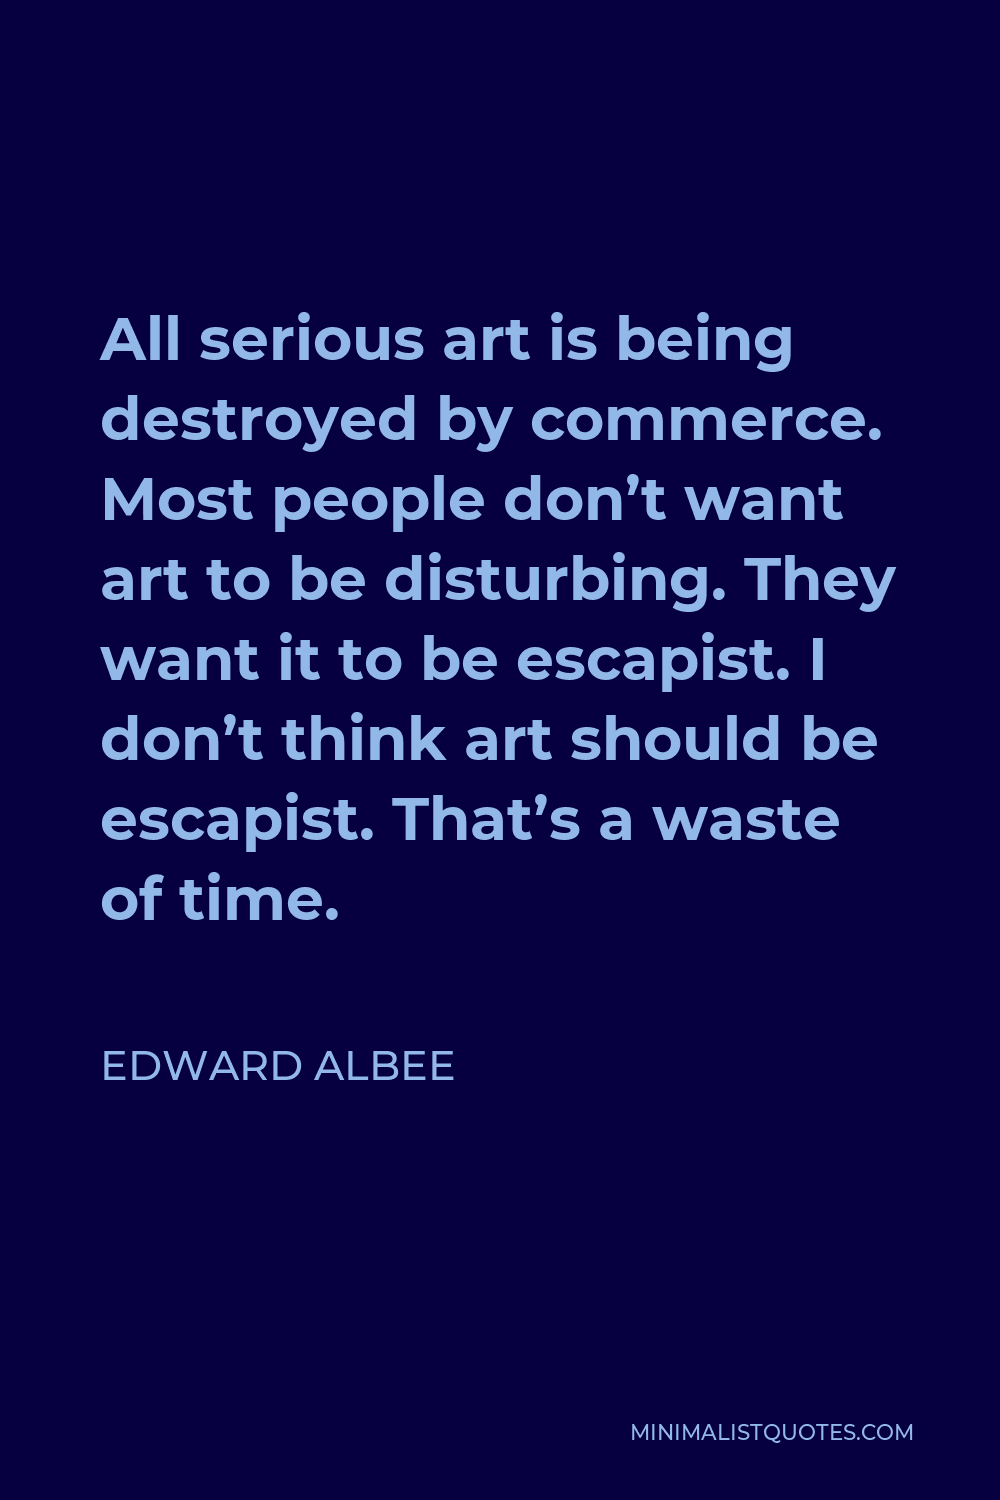 Edward Albee Quote - All serious art is being destroyed by commerce. Most people don’t want art to be disturbing. They want it to be escapist. I don’t think art should be escapist. That’s a waste of time.